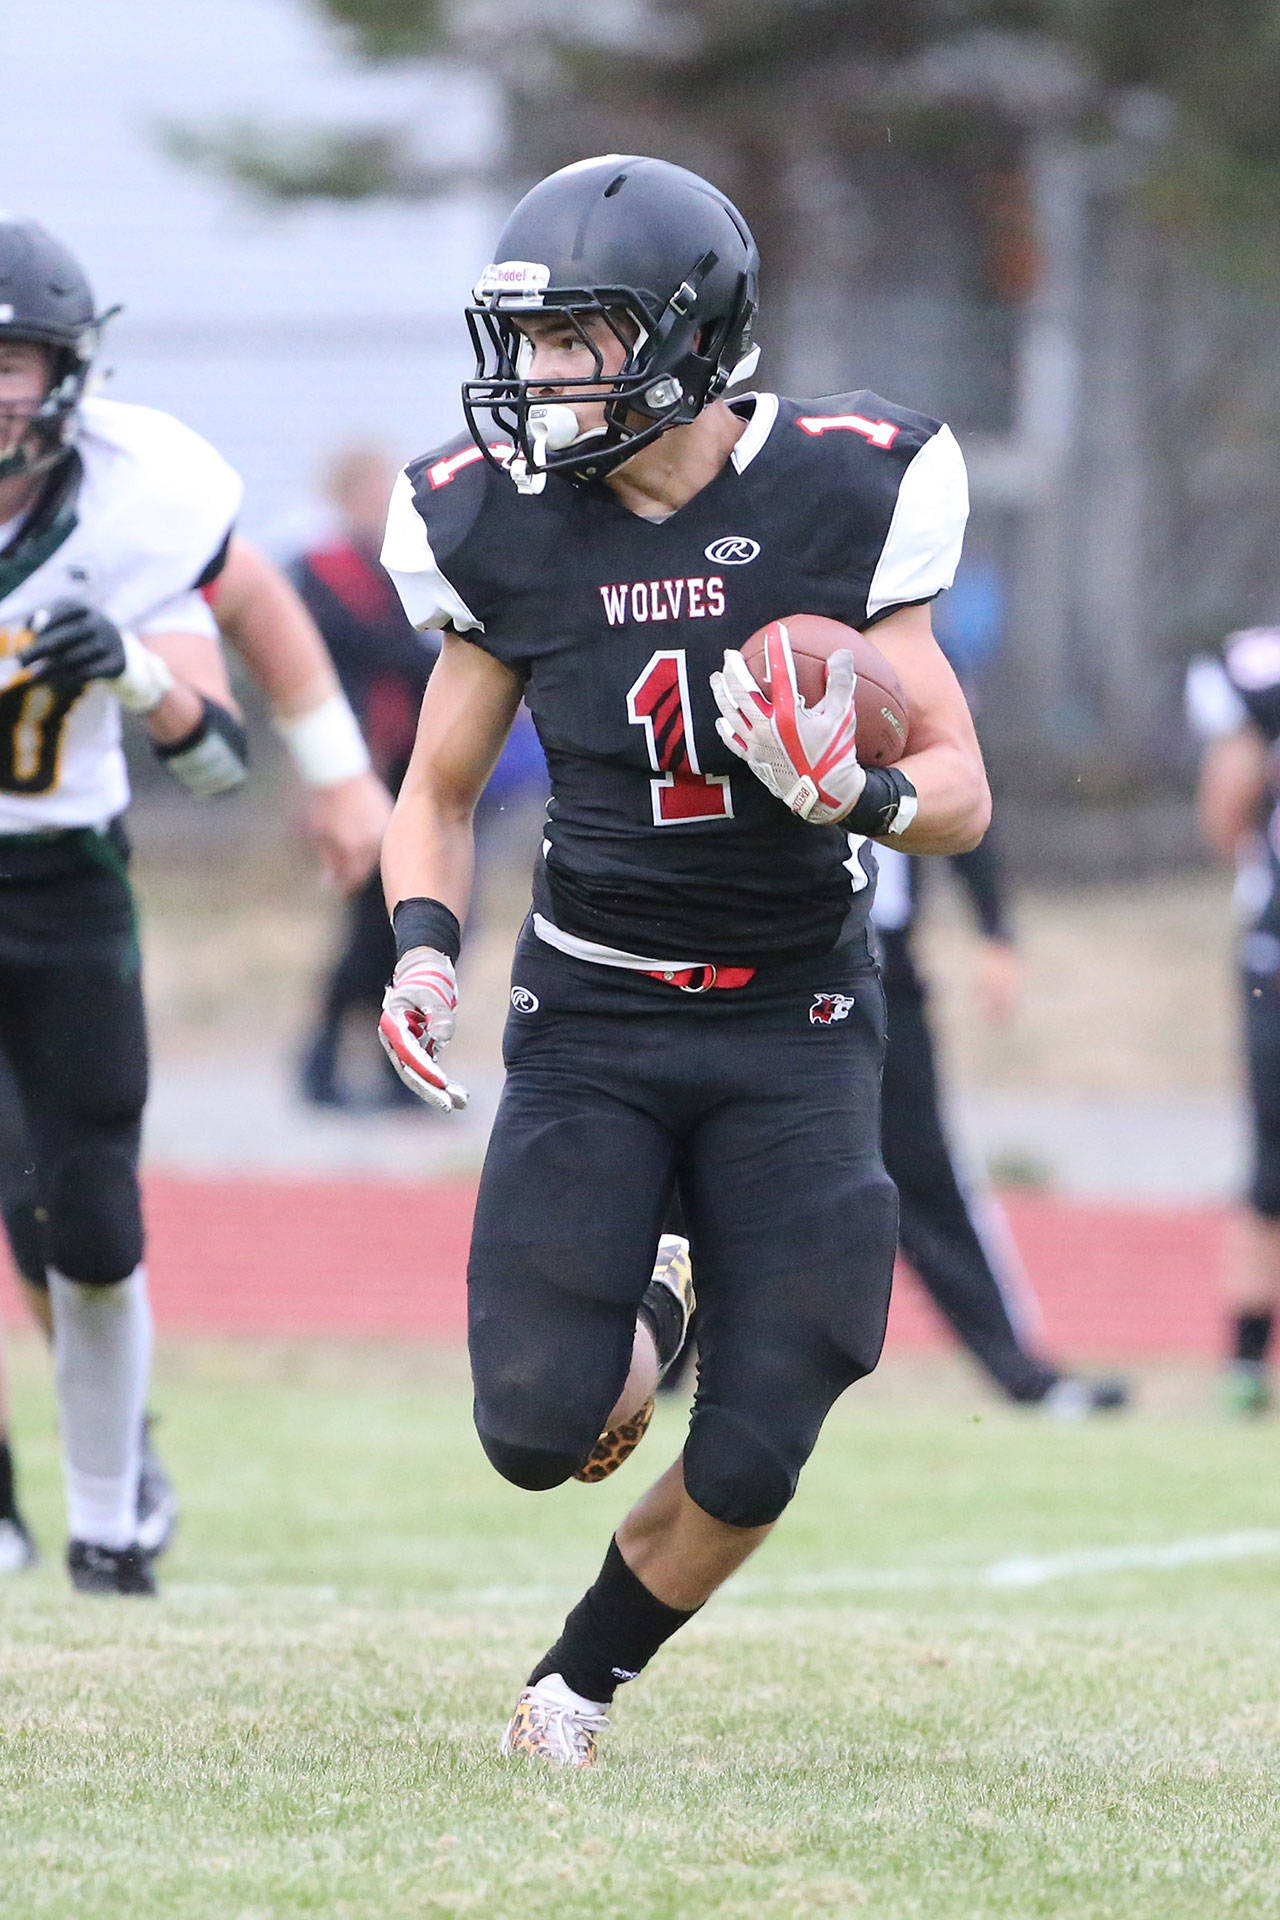 Coupeville’s Sean Toomey-Stout was first-team, all-conference as a running back, defensive back and kick returner in 2018. (Photo by John Fisken)